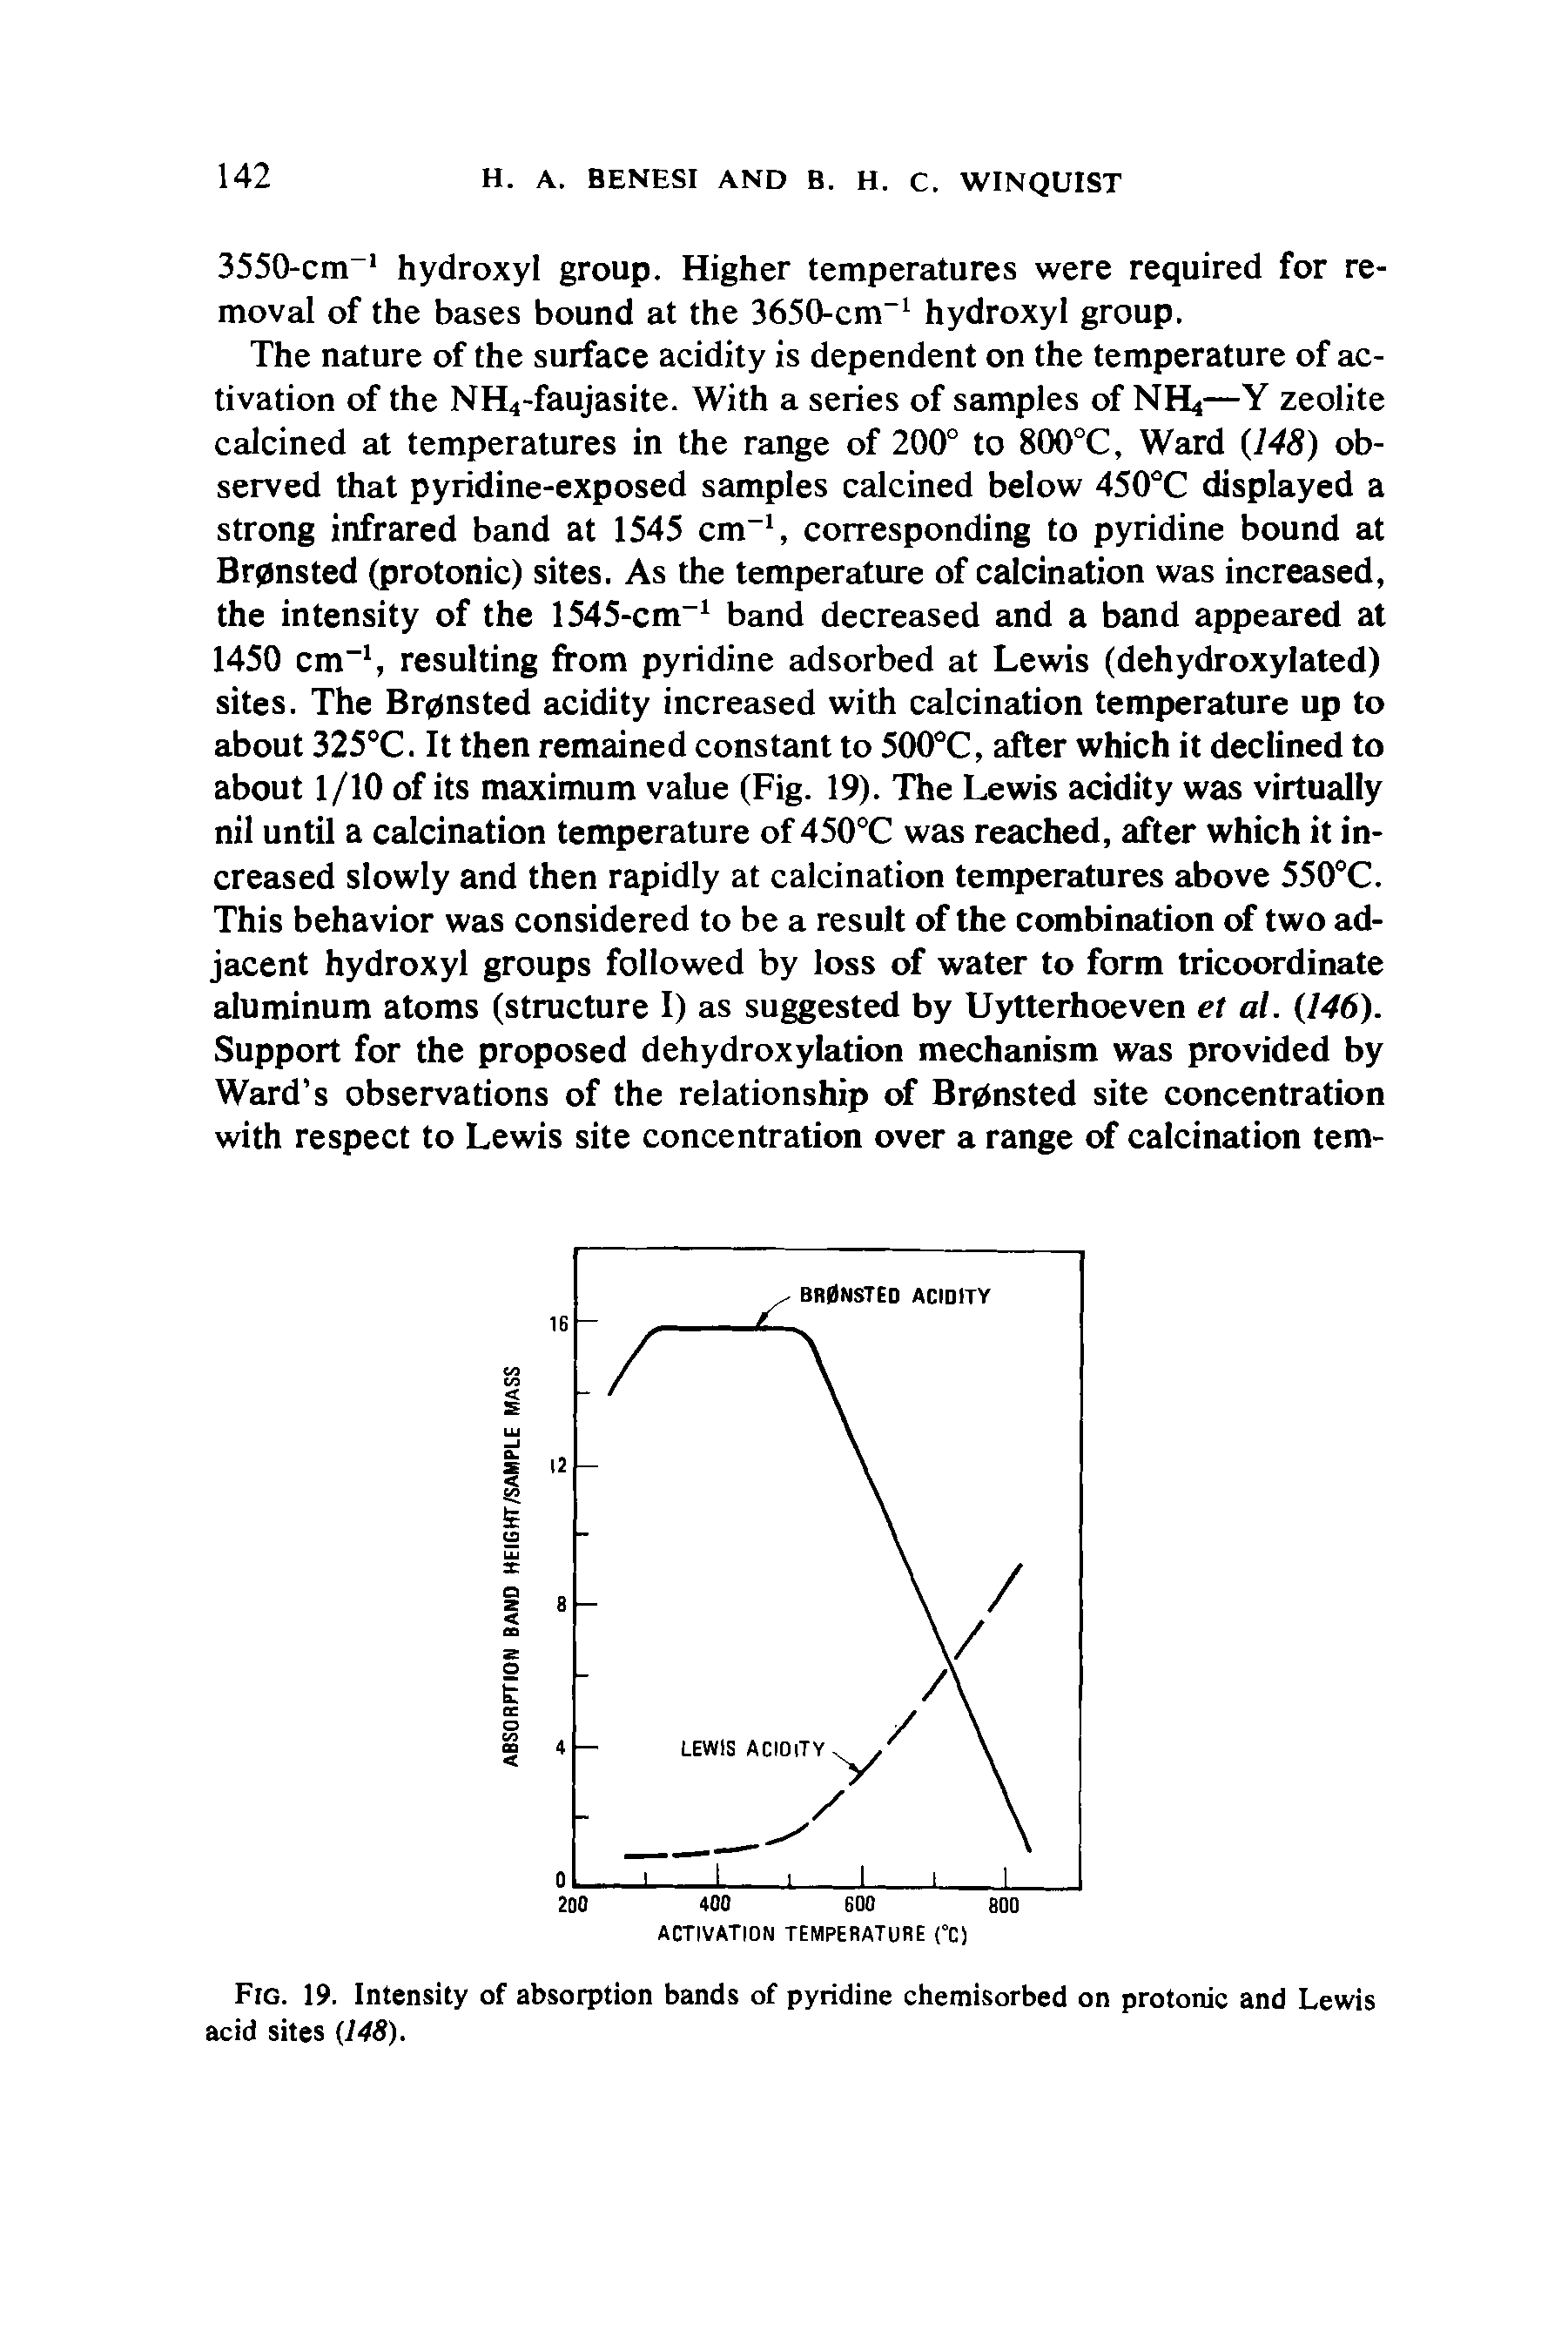 Fig. 19. Intensity of absorption bands of pyridine chemisorbed on protonic and Lewis acid sites (148).